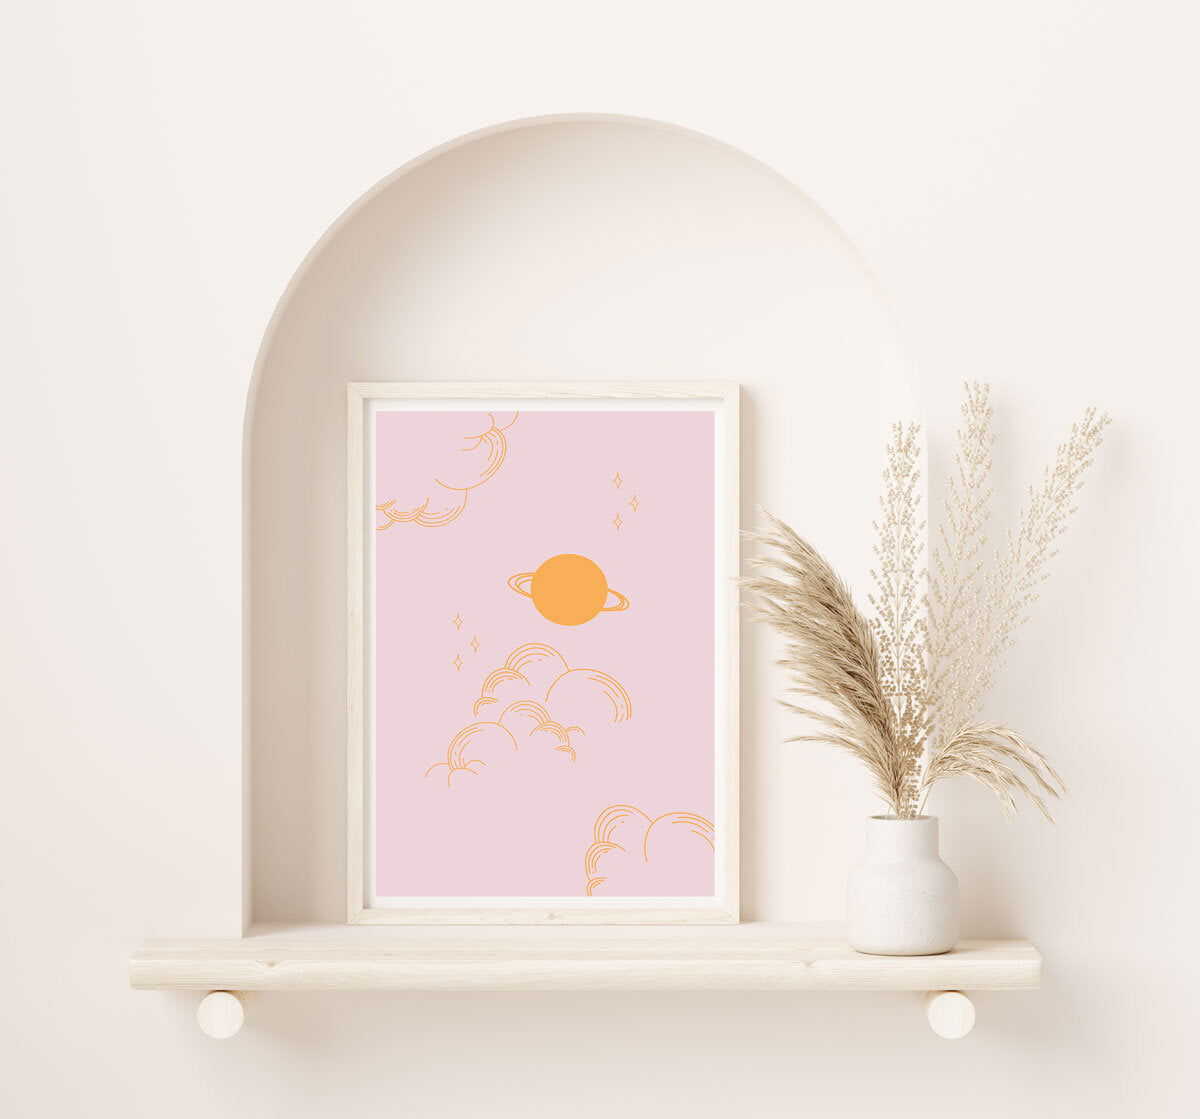 Pink and Gold Space Wall Poster